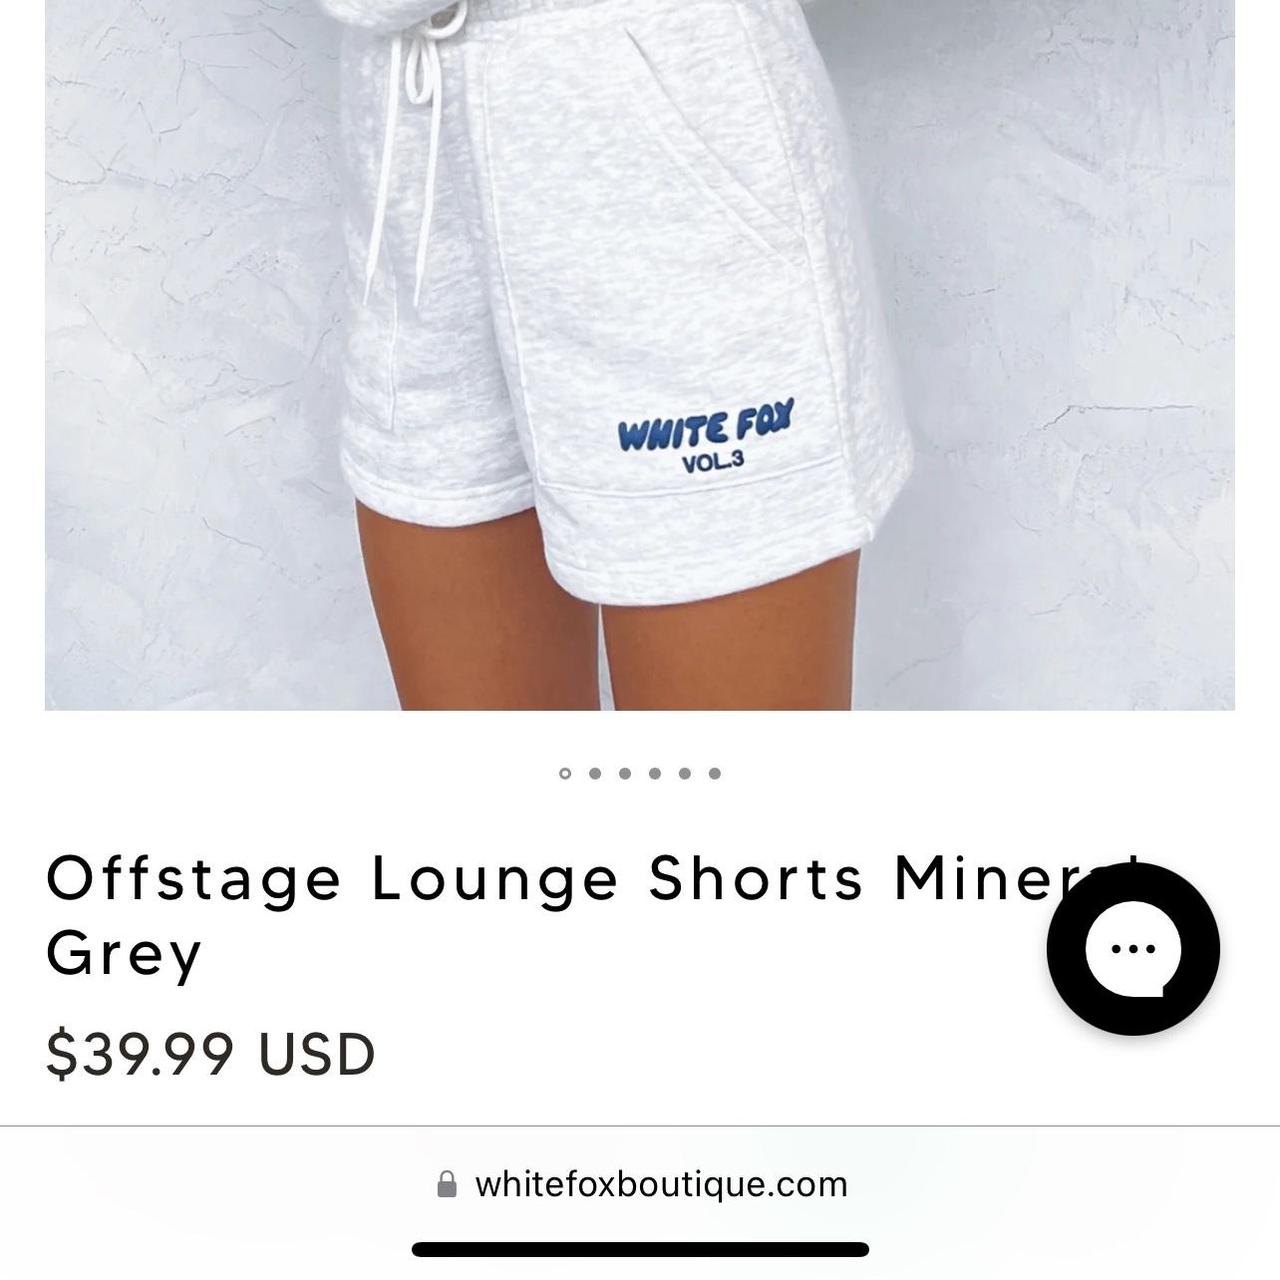 Offstage Lounge Shorts Mineral Grey